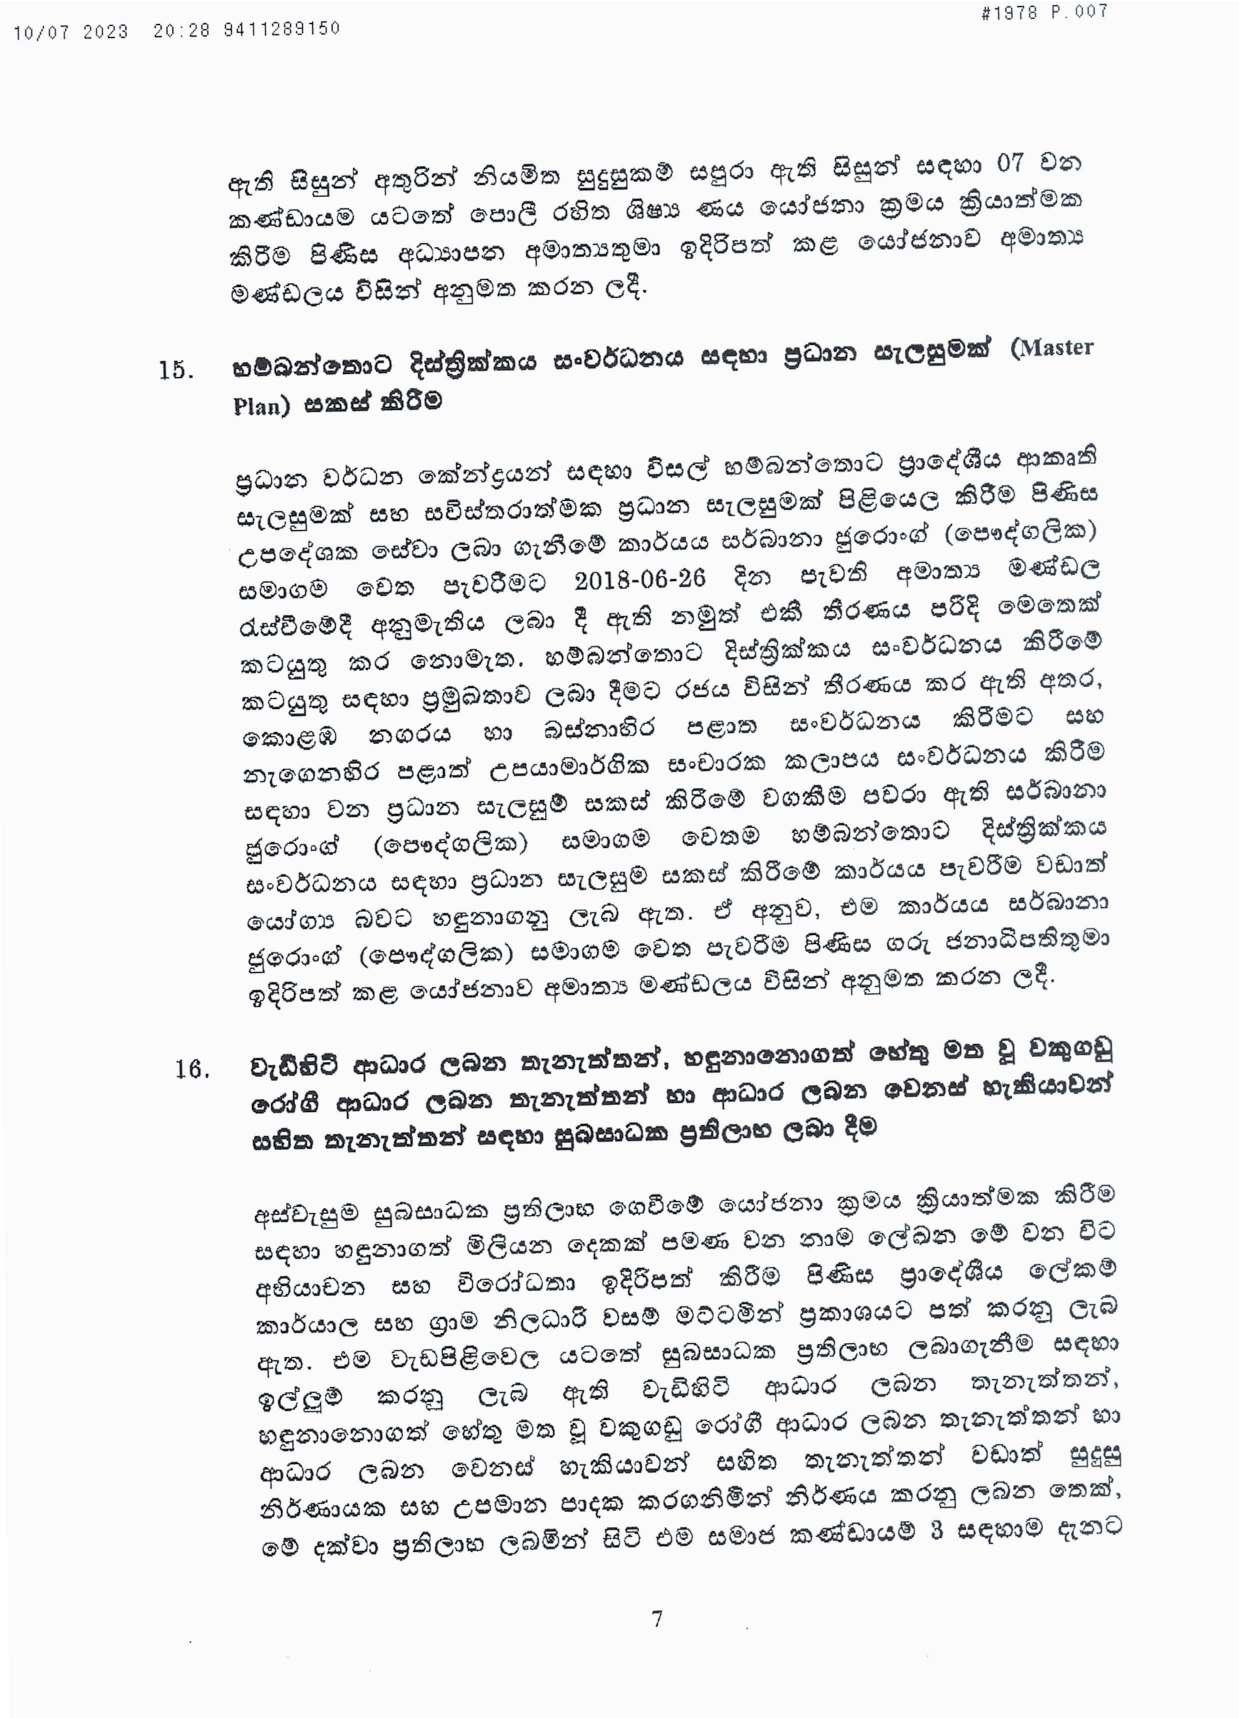 Cabinet Decision on 10.07.2023d page 007